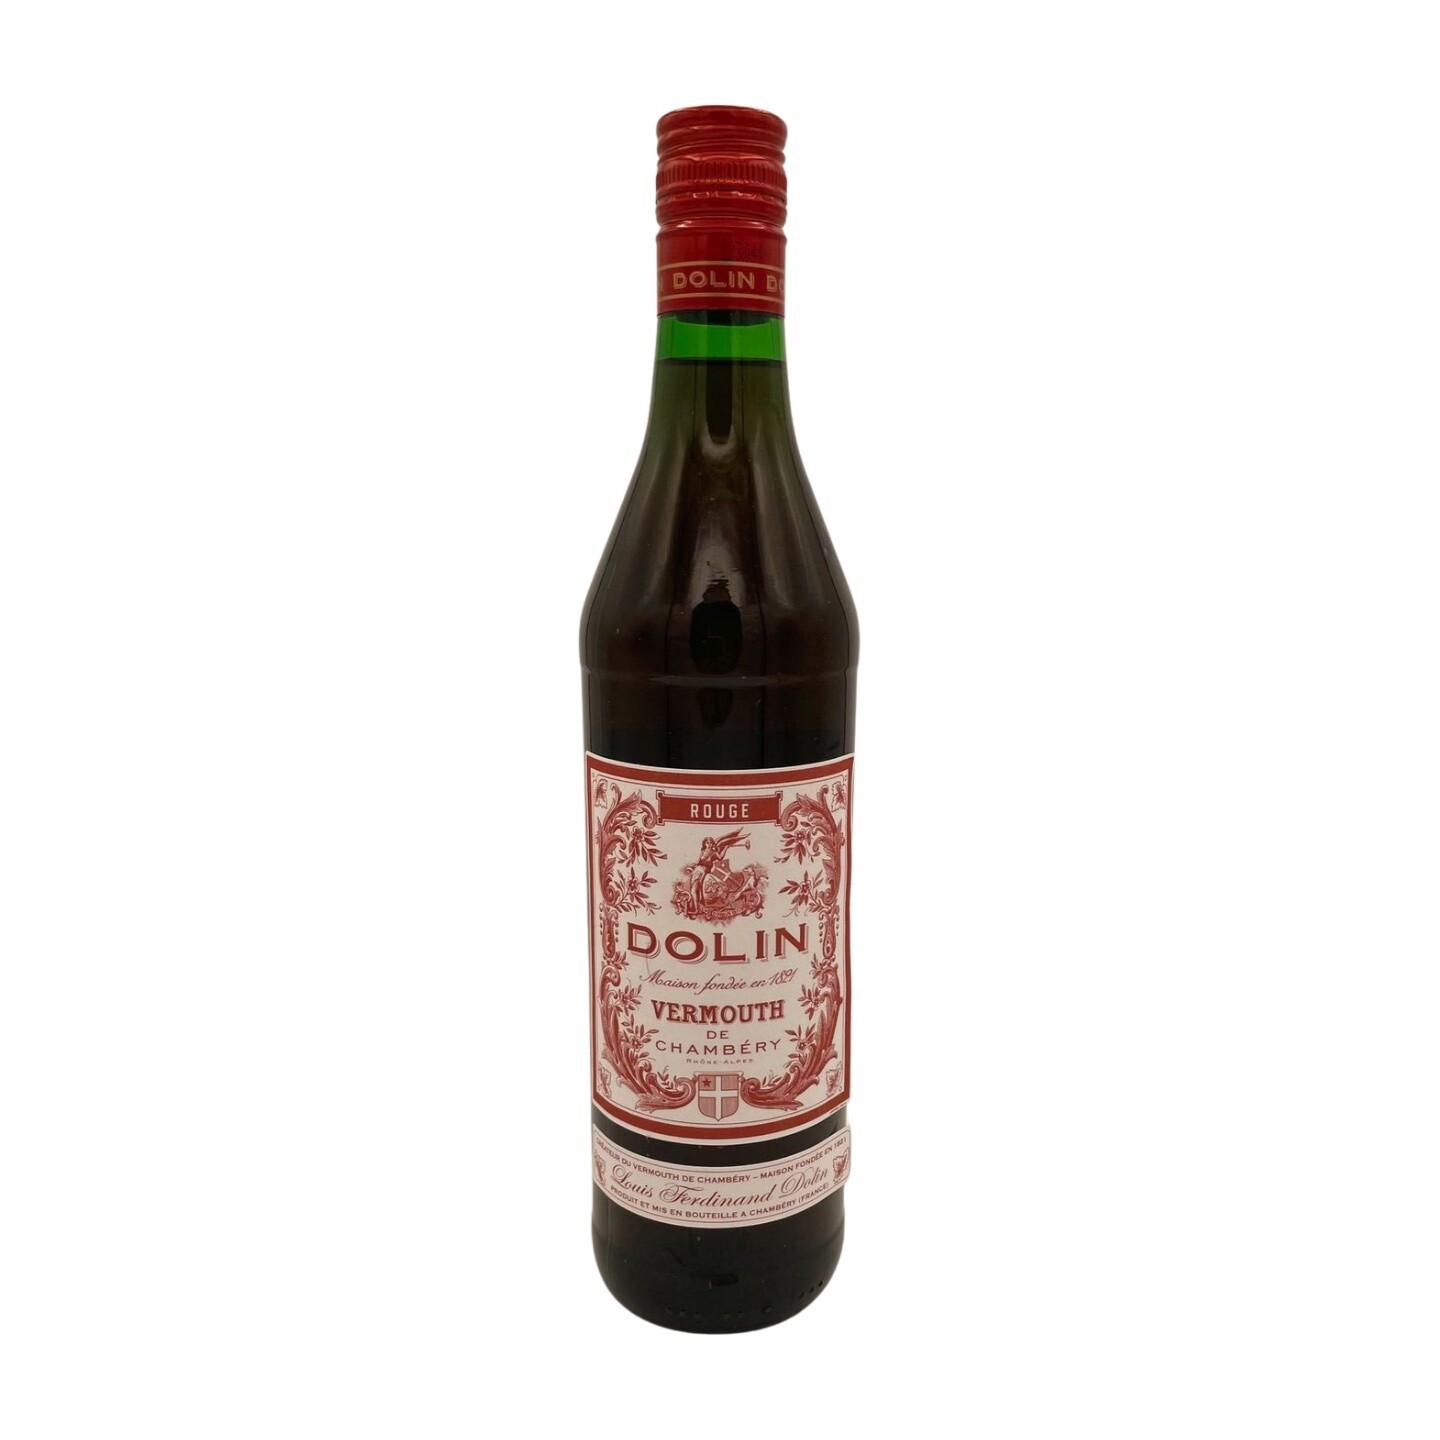 Dolin Rouge Vermouth de Chambéry (750mL)